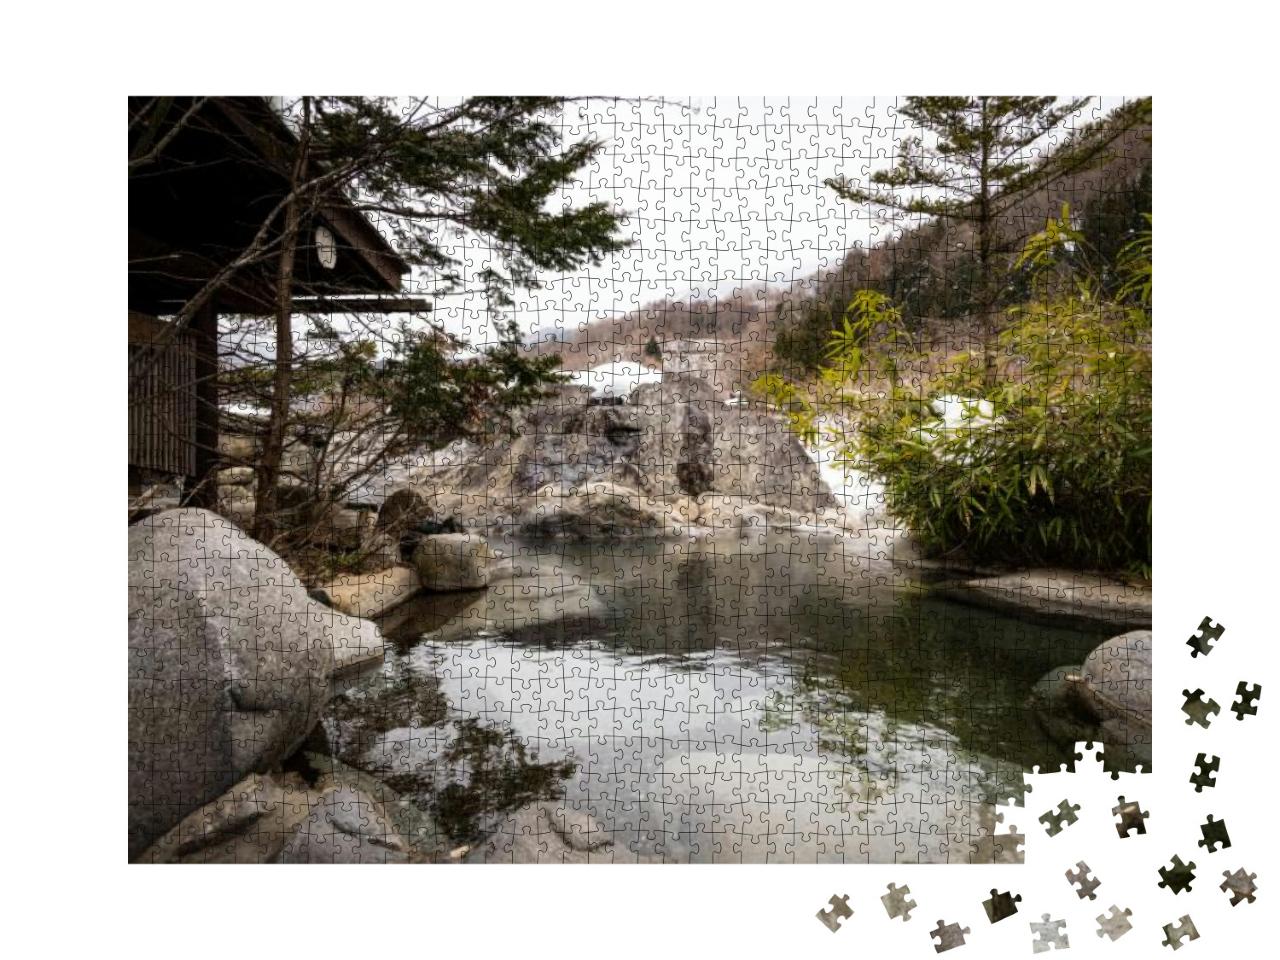 Hot Springs in Japan... Jigsaw Puzzle with 1000 pieces